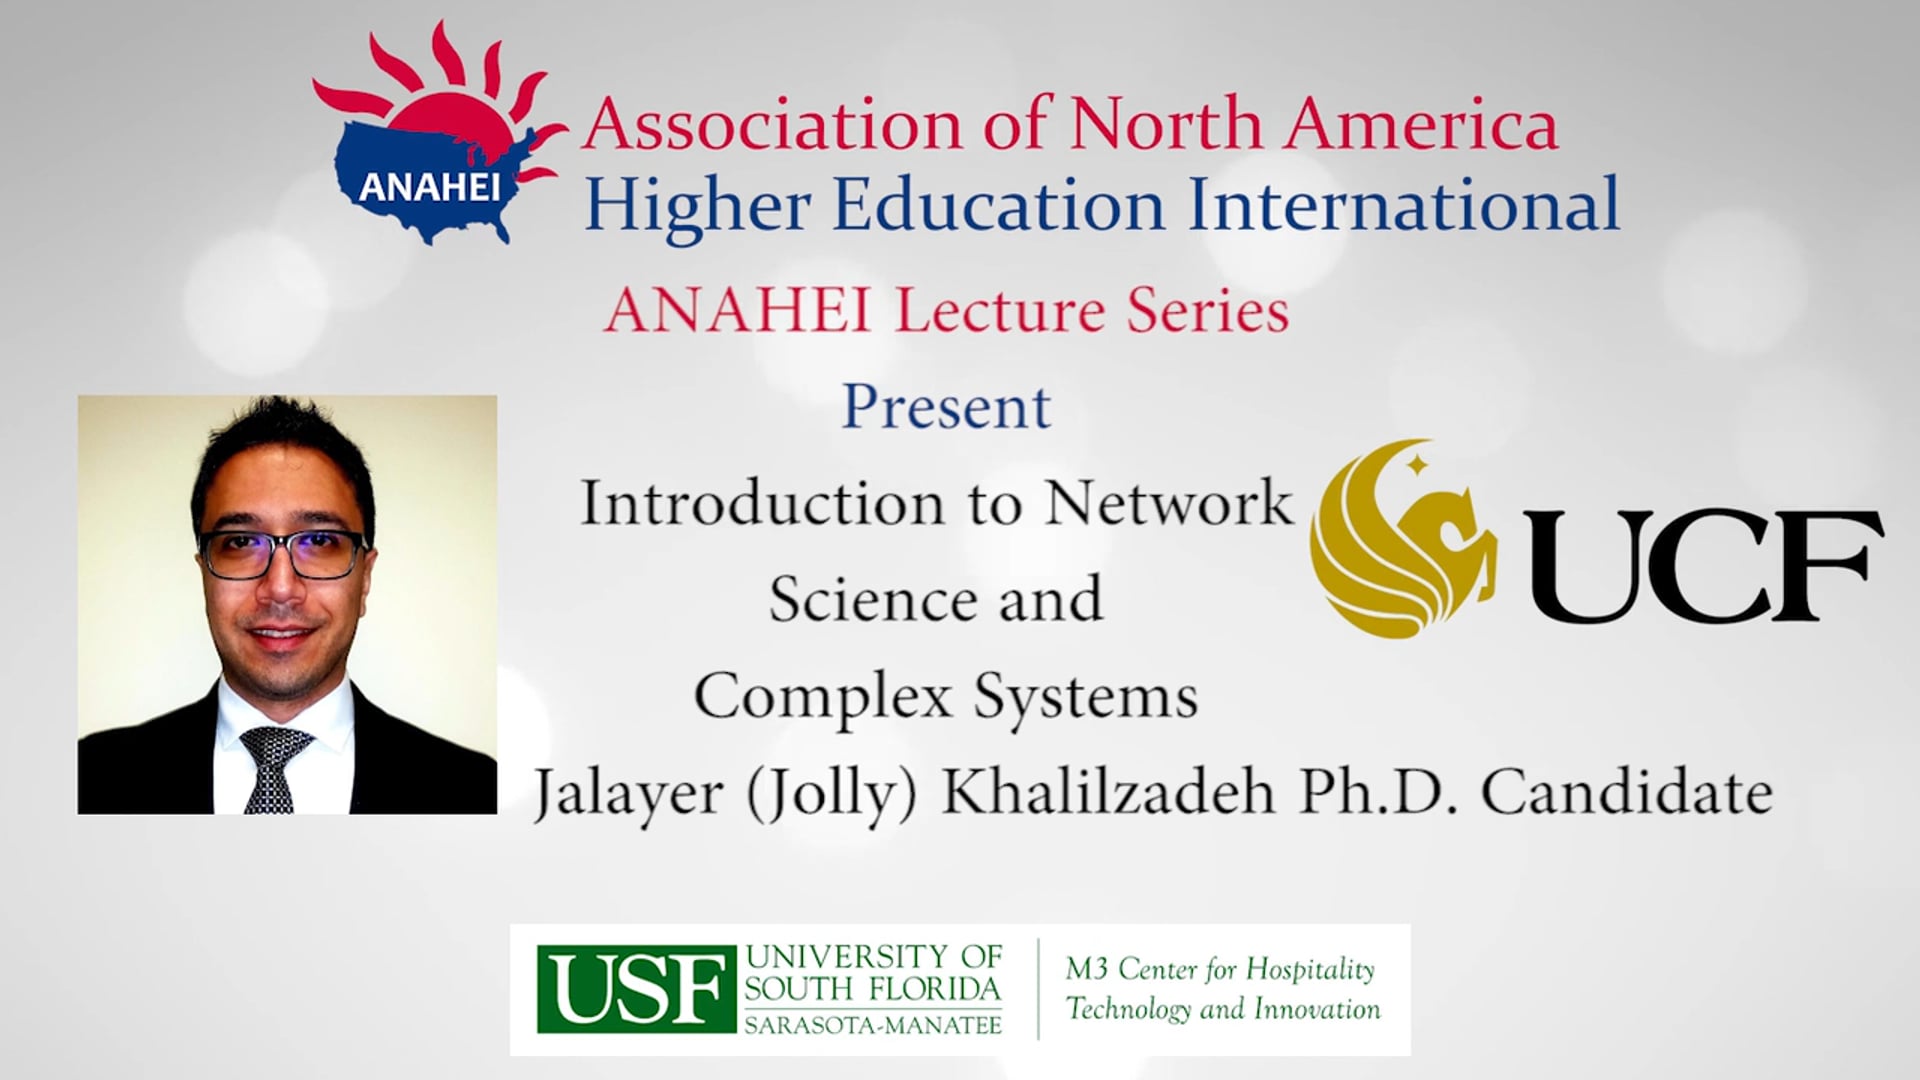 ANAHEI Lecture Series: Jalayer (Jolly) Khalilzadeh Ph.D. Candidate